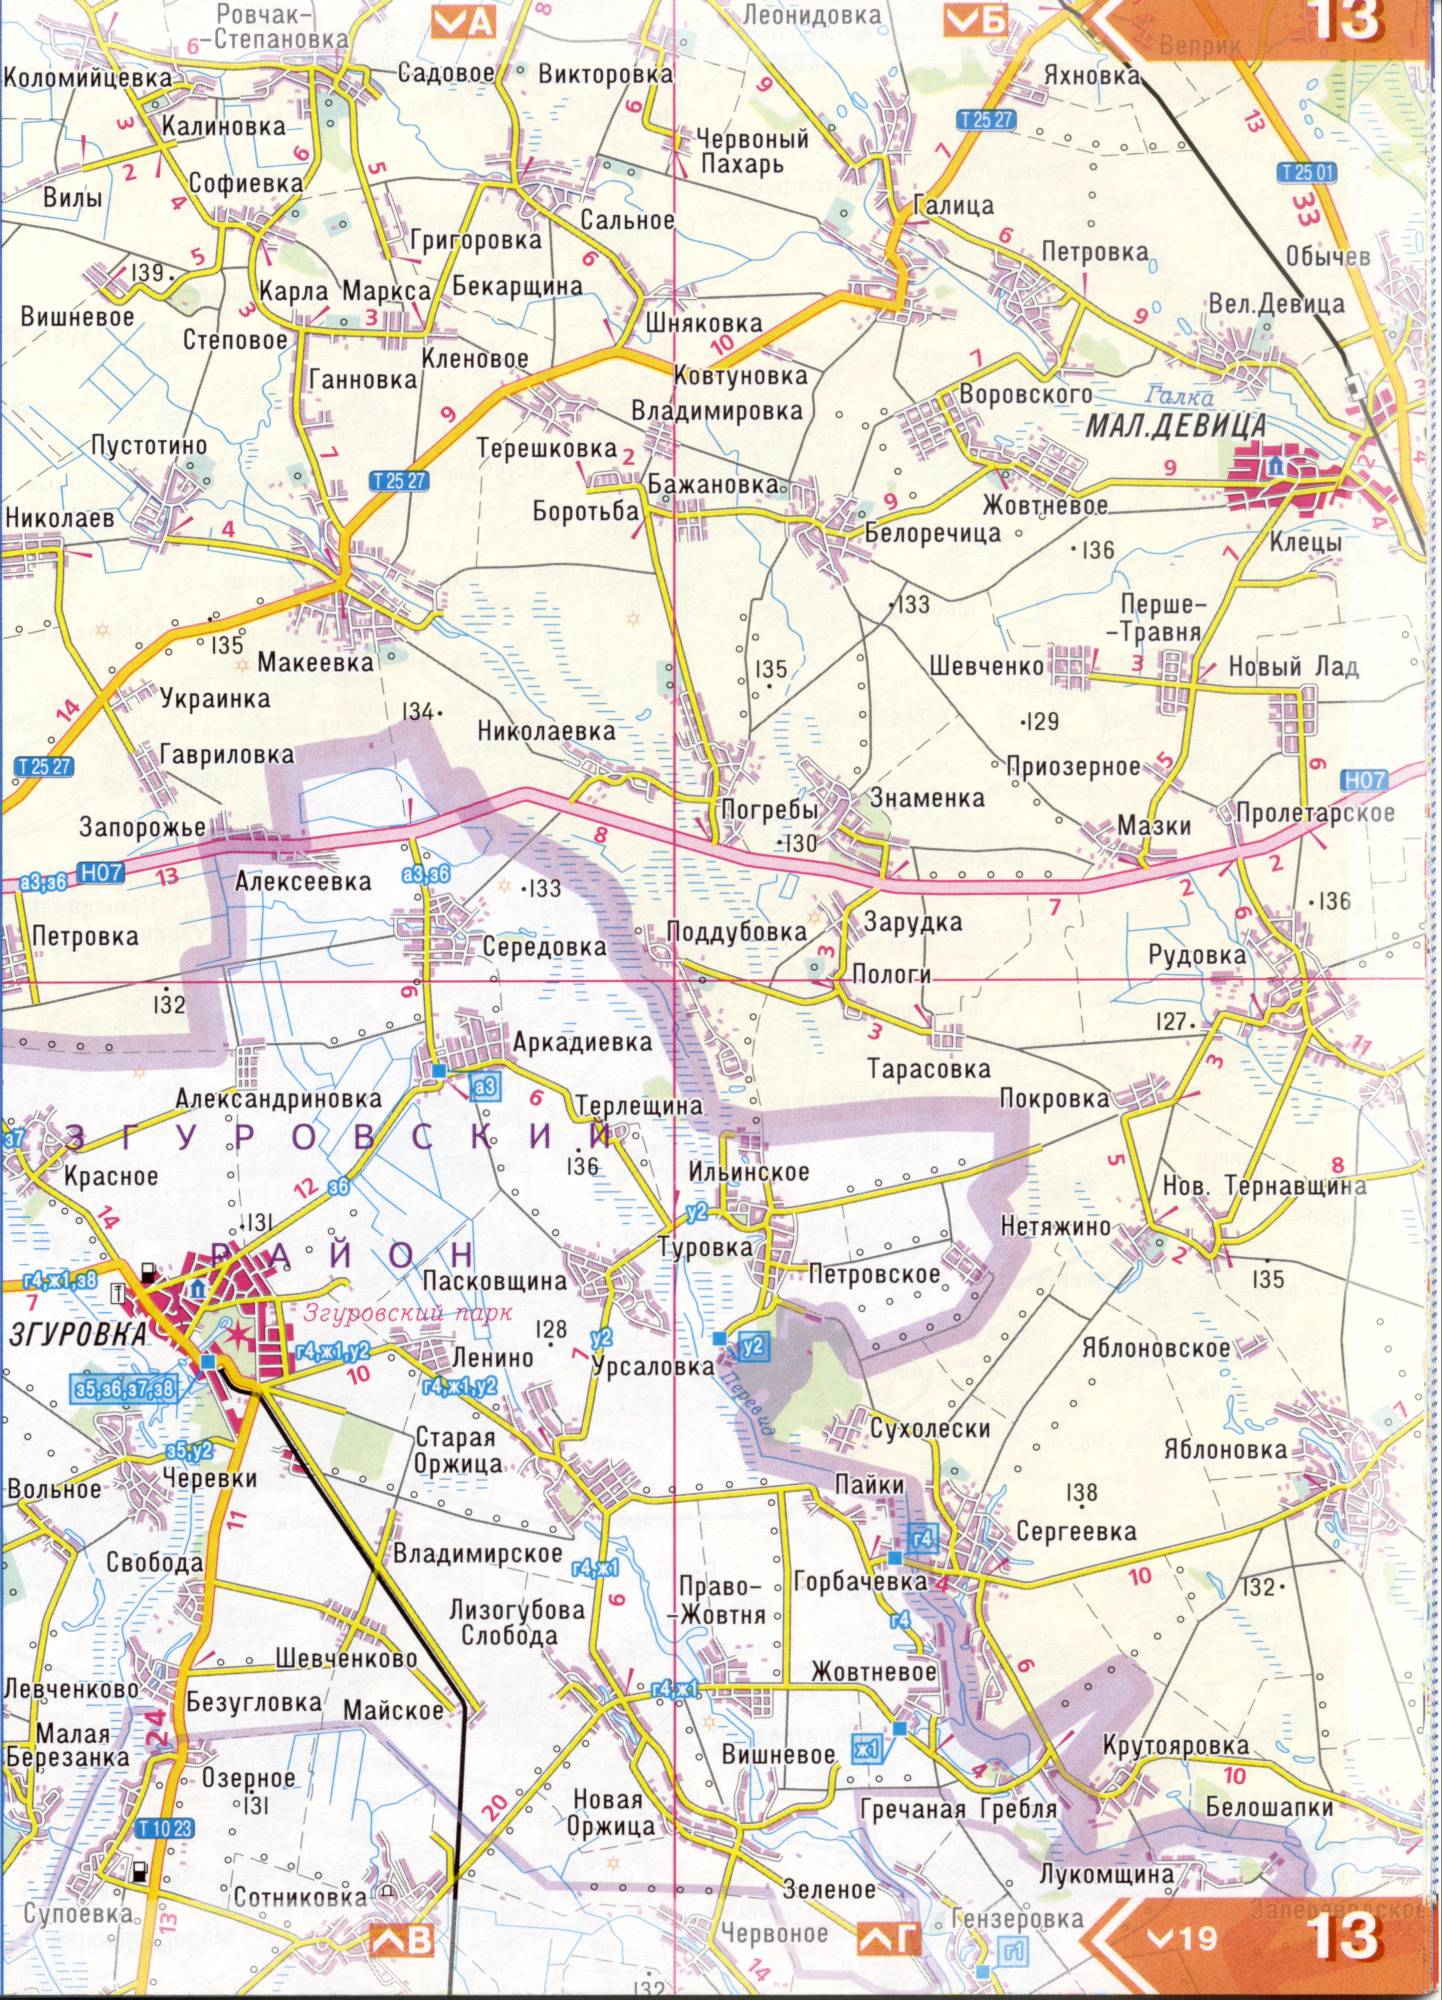 Atlas of the Kiev region. Detailed map of the Kiev region from the road atlas. Kiev region on a detailed map of scale 1cm = 3km. Free Download, F2